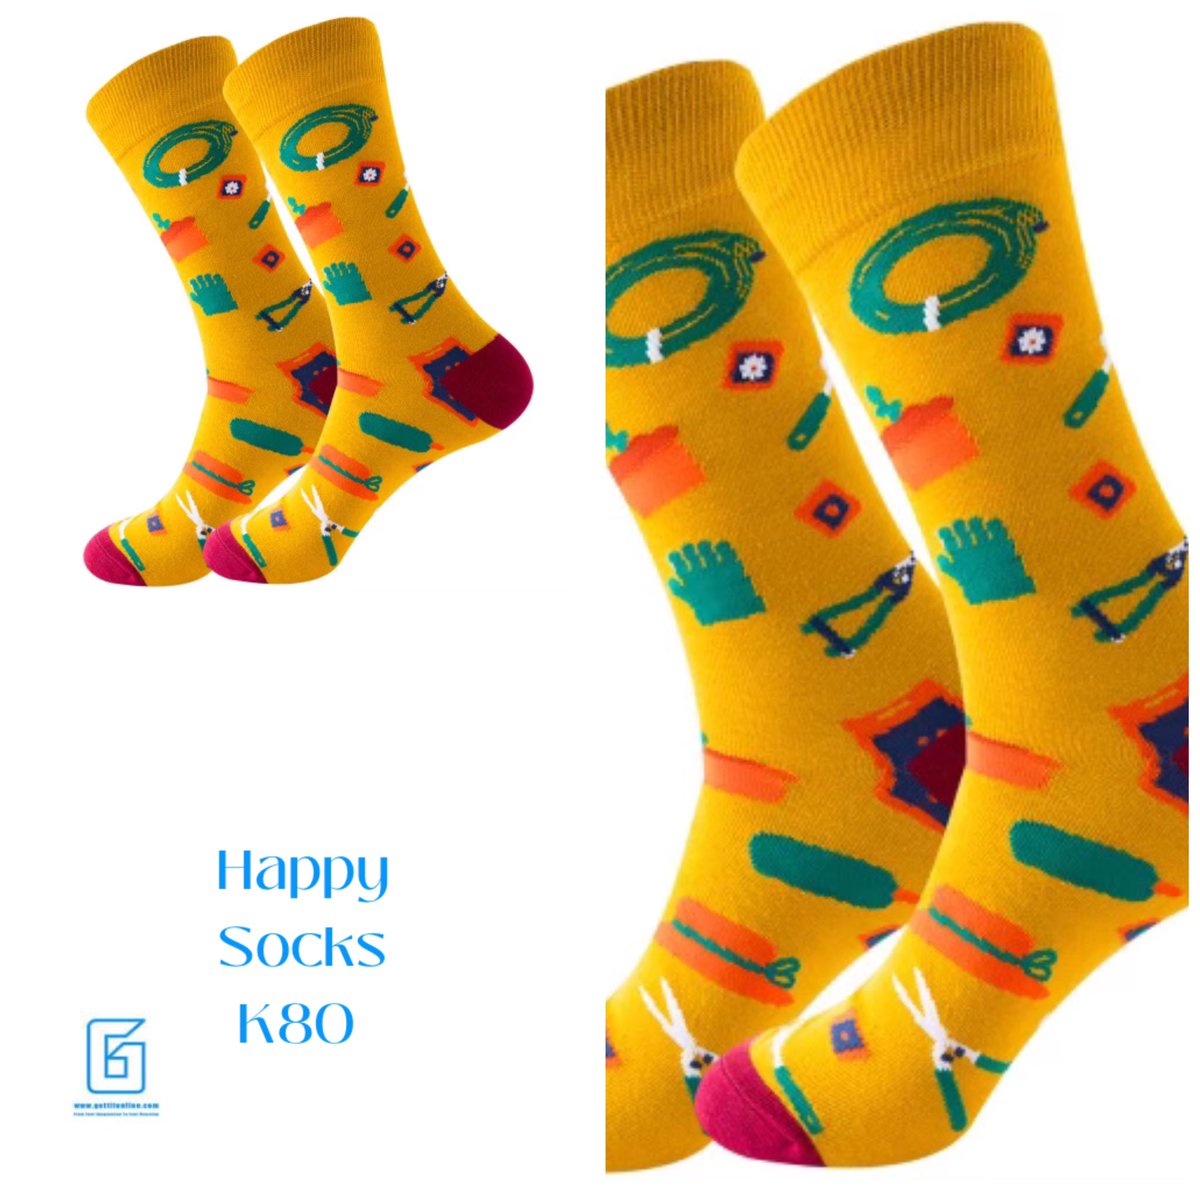 'Step up your sock game with our rainbow of happiness 🧦” 
Happy socks back in stock. 
 #happysocks #variety #fashionforward'